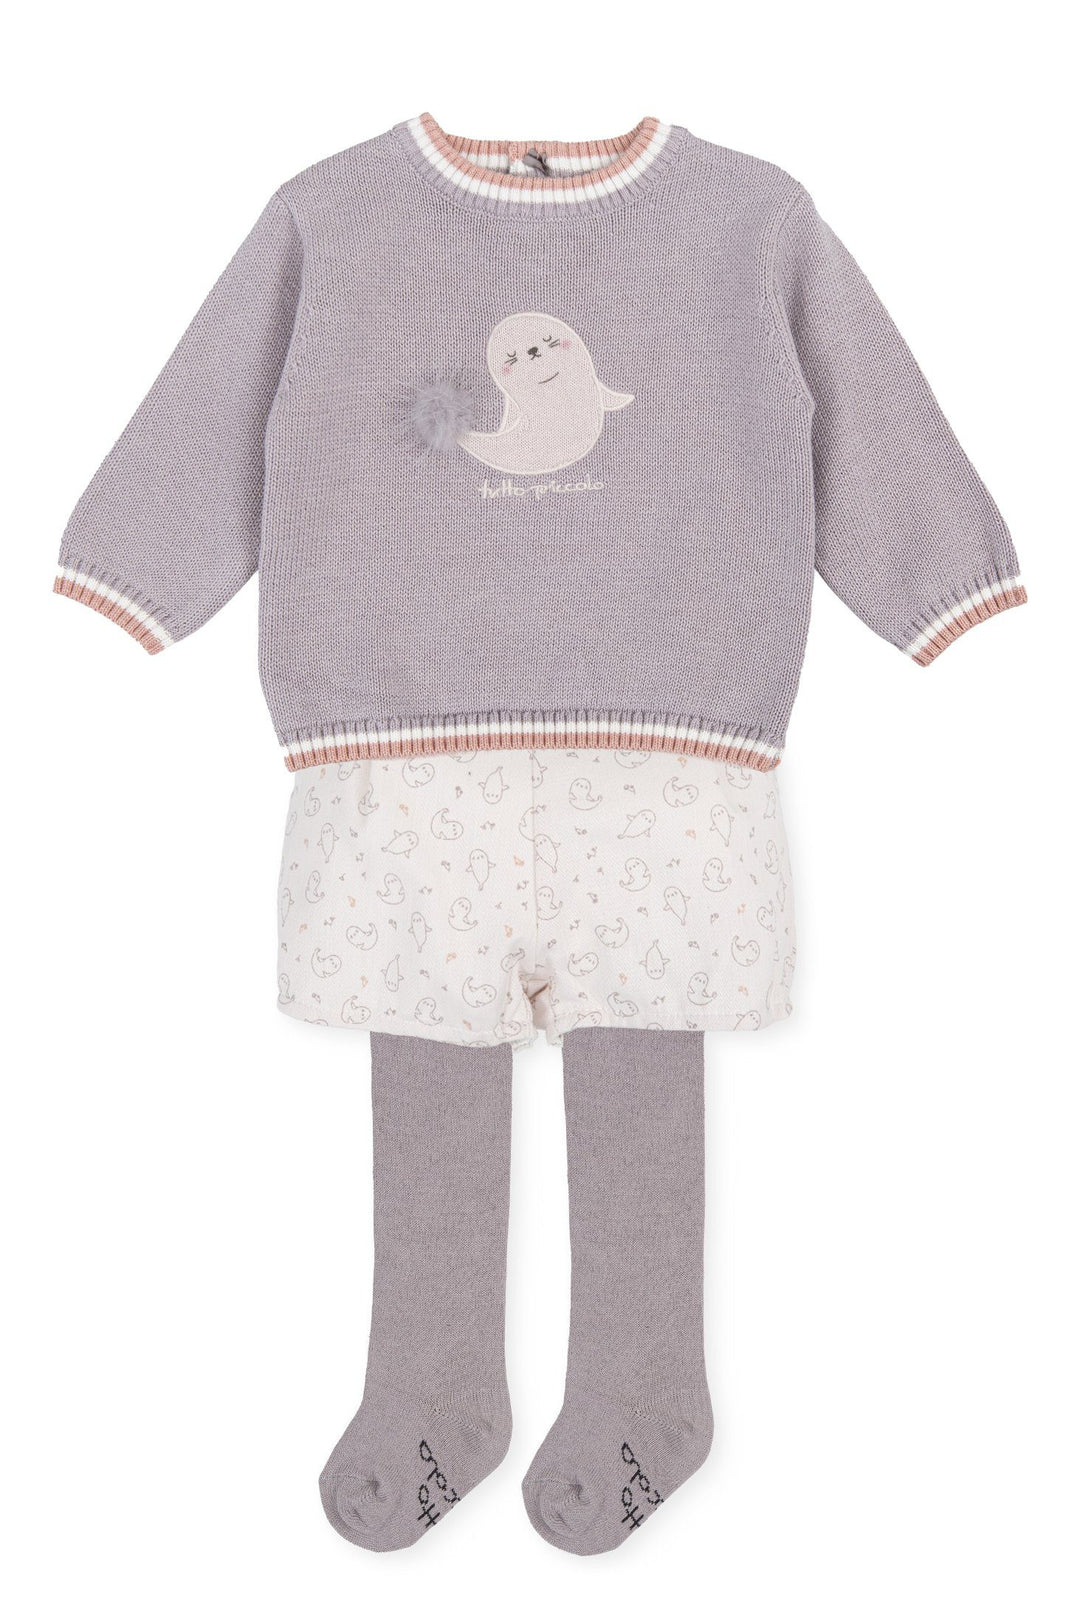 Tutto Piccolo "Devin" Grey Knit Seal Top, Jam Pants & Tights | Millie and John